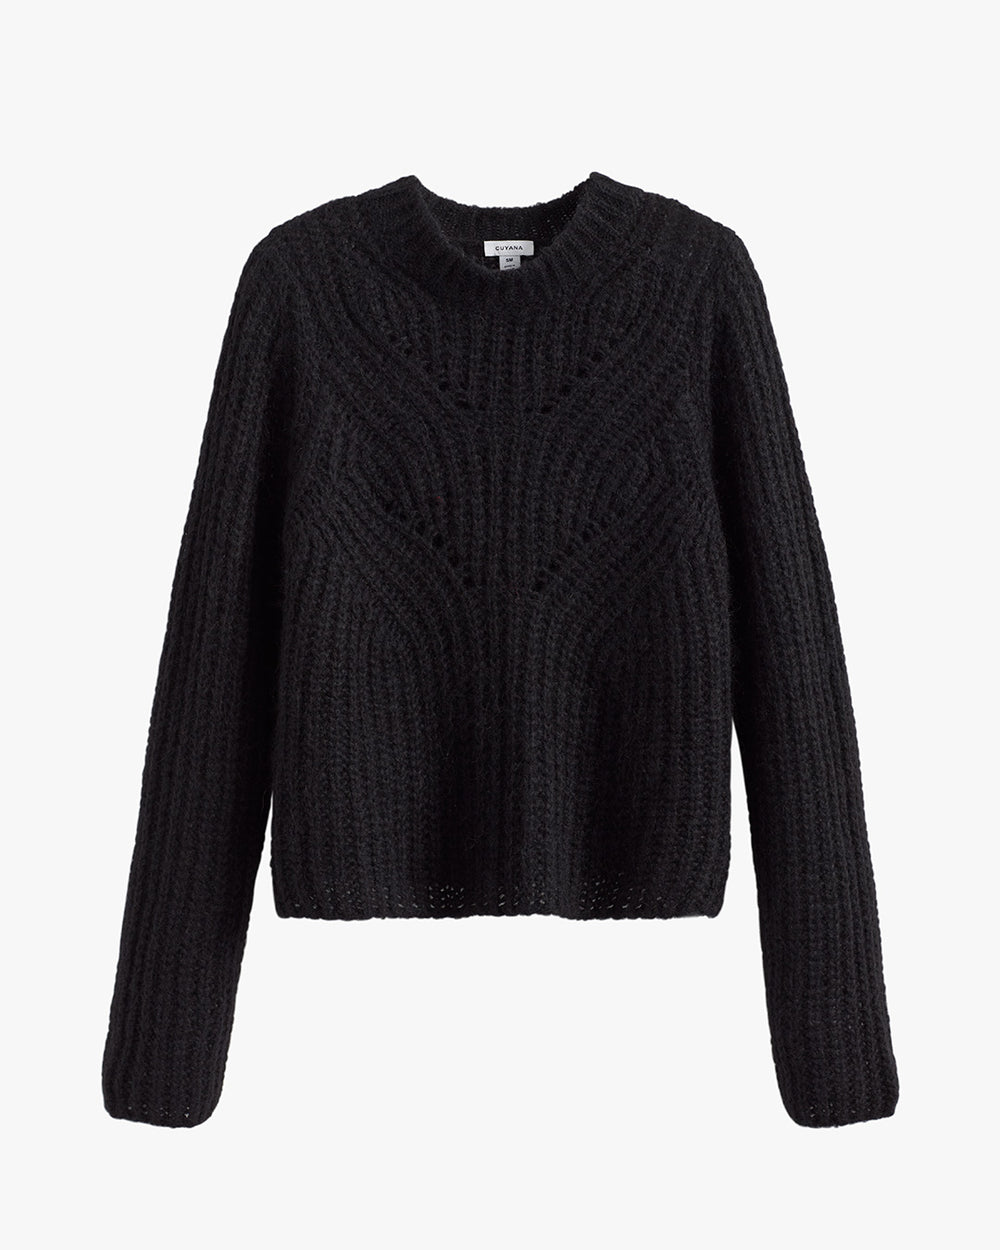 Knitted sweater with long sleeves and cable patterns on a plain background.